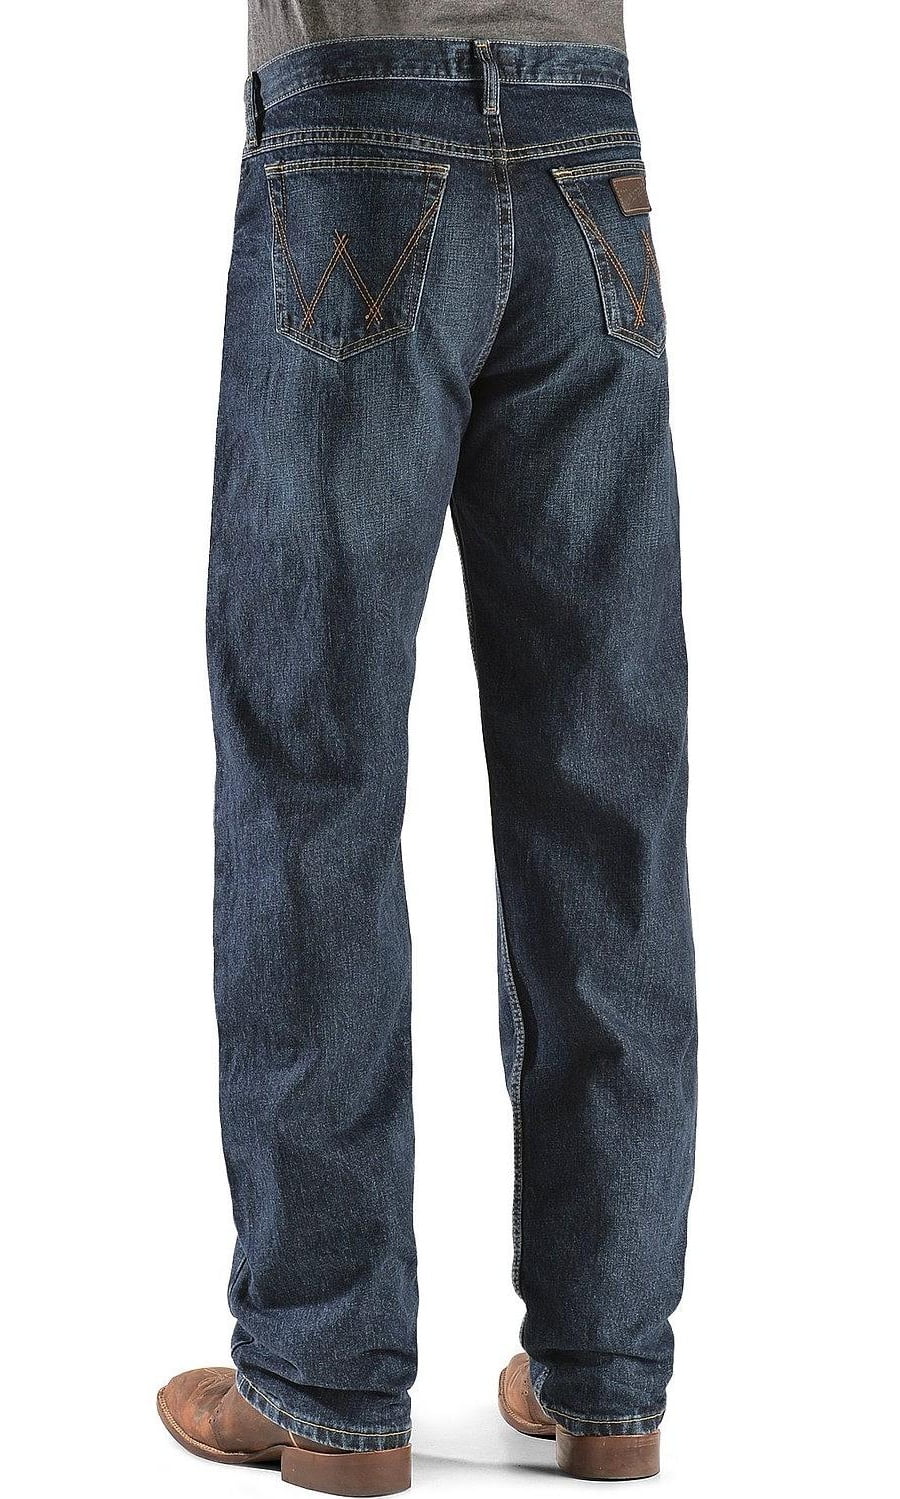 wrangler men's 20x 01 competition relaxed fit jean